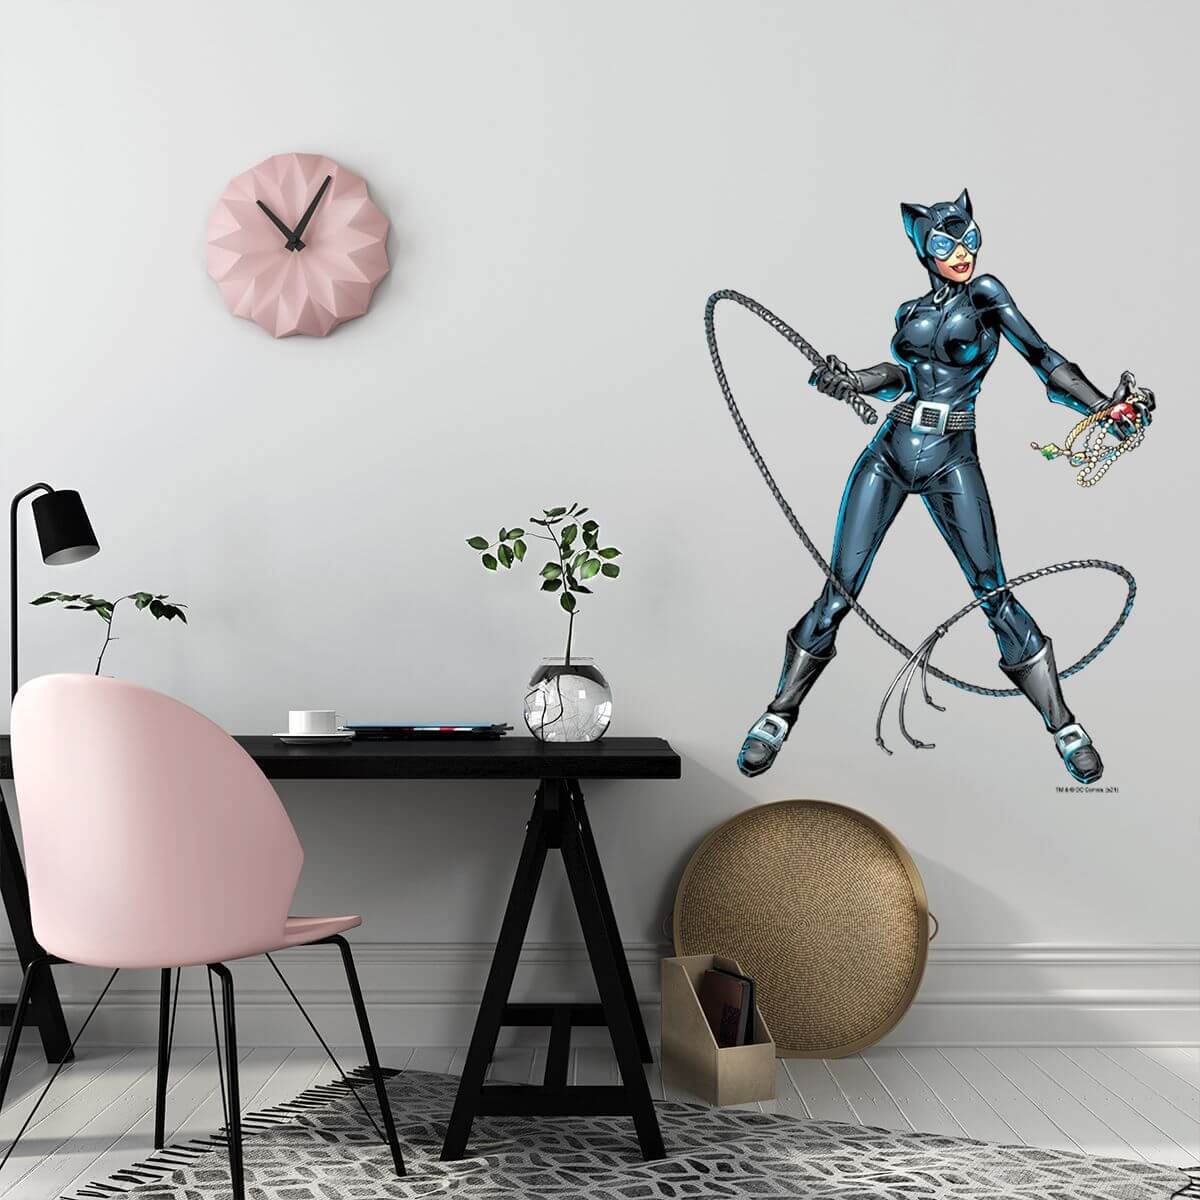 Kismet Decals Catwoman Thief of The Night Licensed Wall Sticker - Easy DIY Justice League Home & Room Decor Wall Art - Kismet Decals